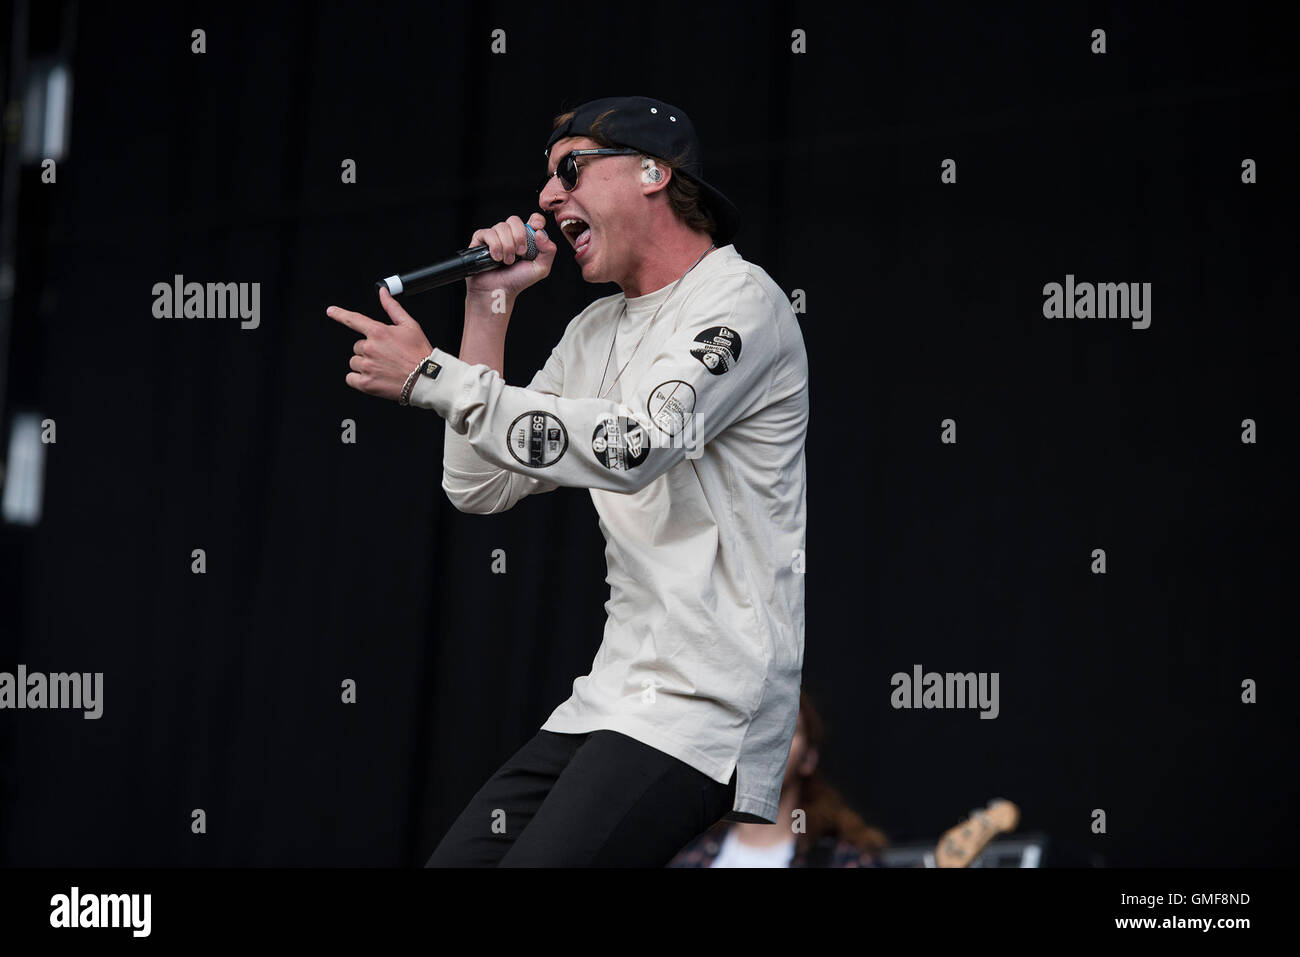 Leeds, UK. 26th August 2016. Derek Discanio, Ryan Scott Graham, Tyler Szalkowski, Tony Diaz and Evan Ambrosio of State Champs perform on the main stage at Leeds Festival 2016, 26/08/2016 Credit:  Gary Mather/Alamy Live News Stock Photo